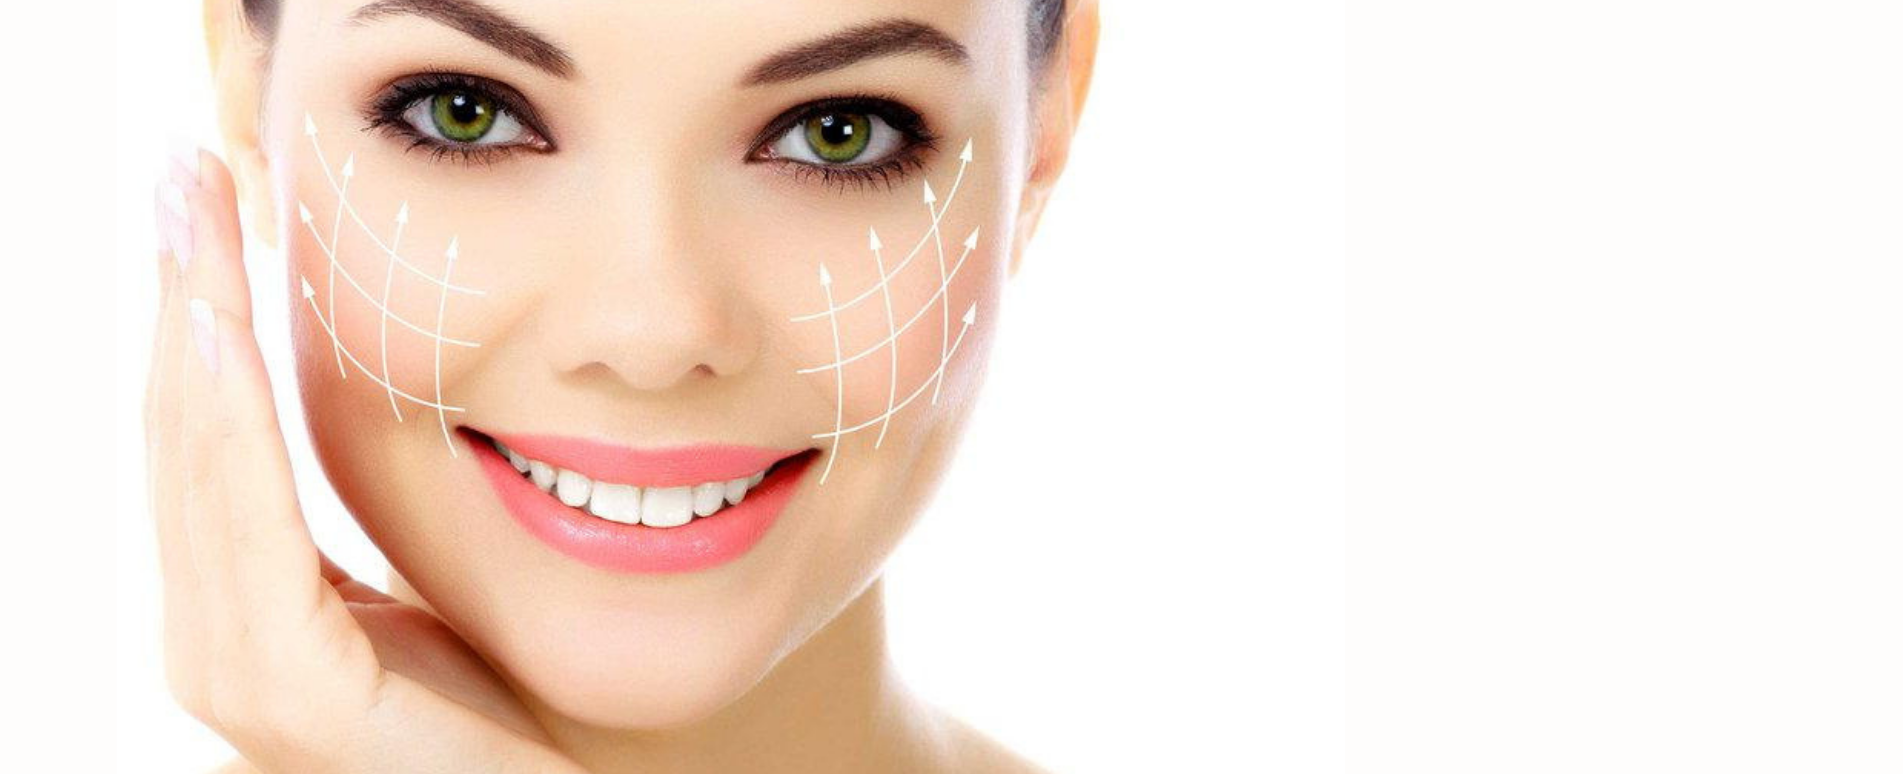 Professional Aesthetic Treatments by Leading Experts